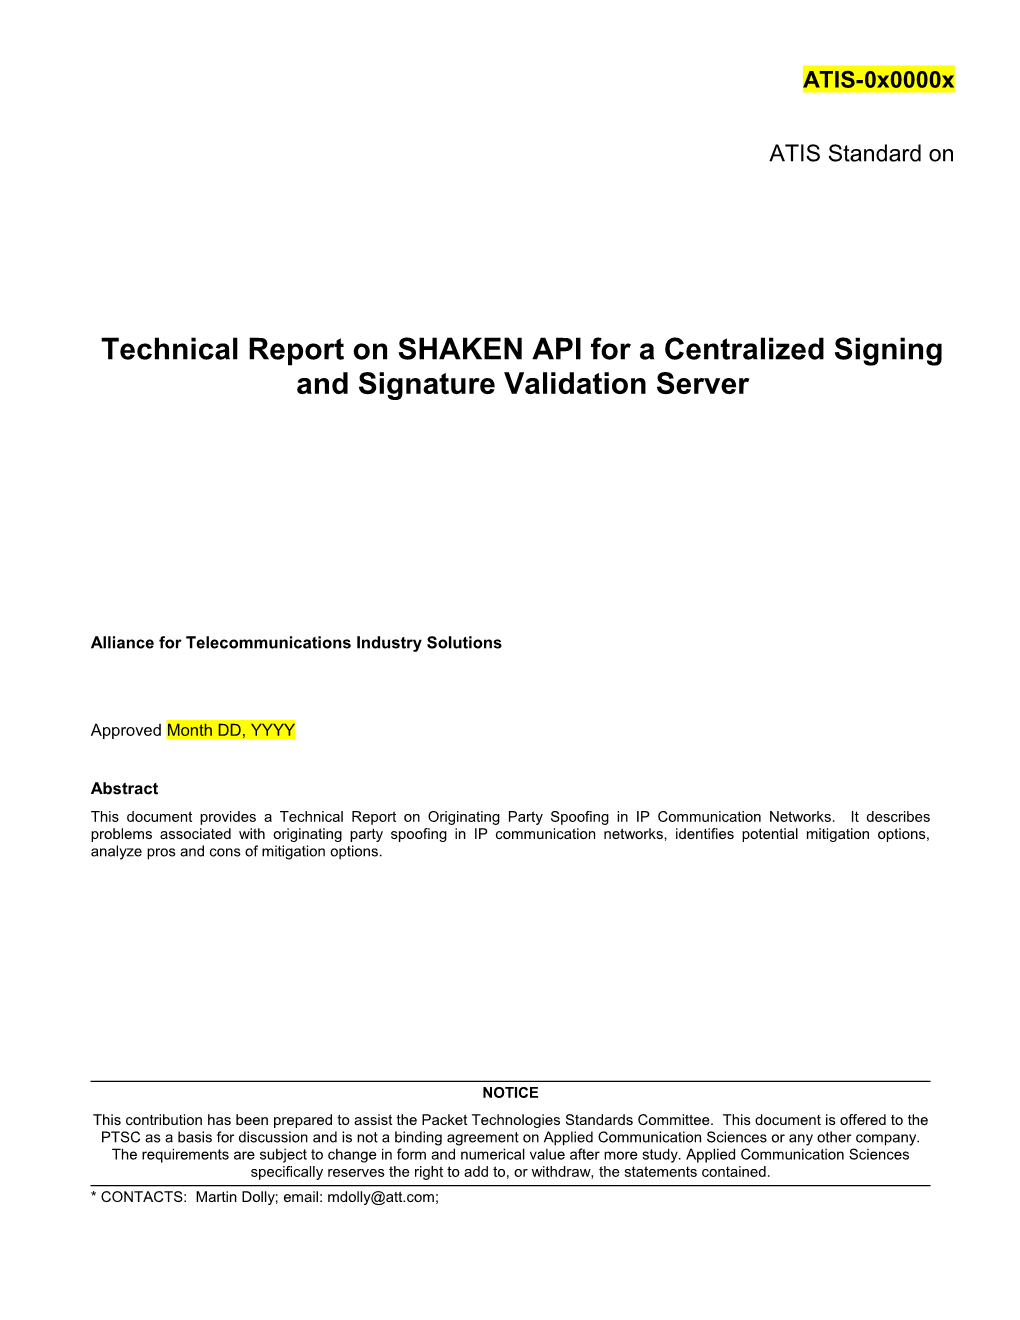 Technical Report on SHAKEN API for a Centralized Signing and Signature Validation Server